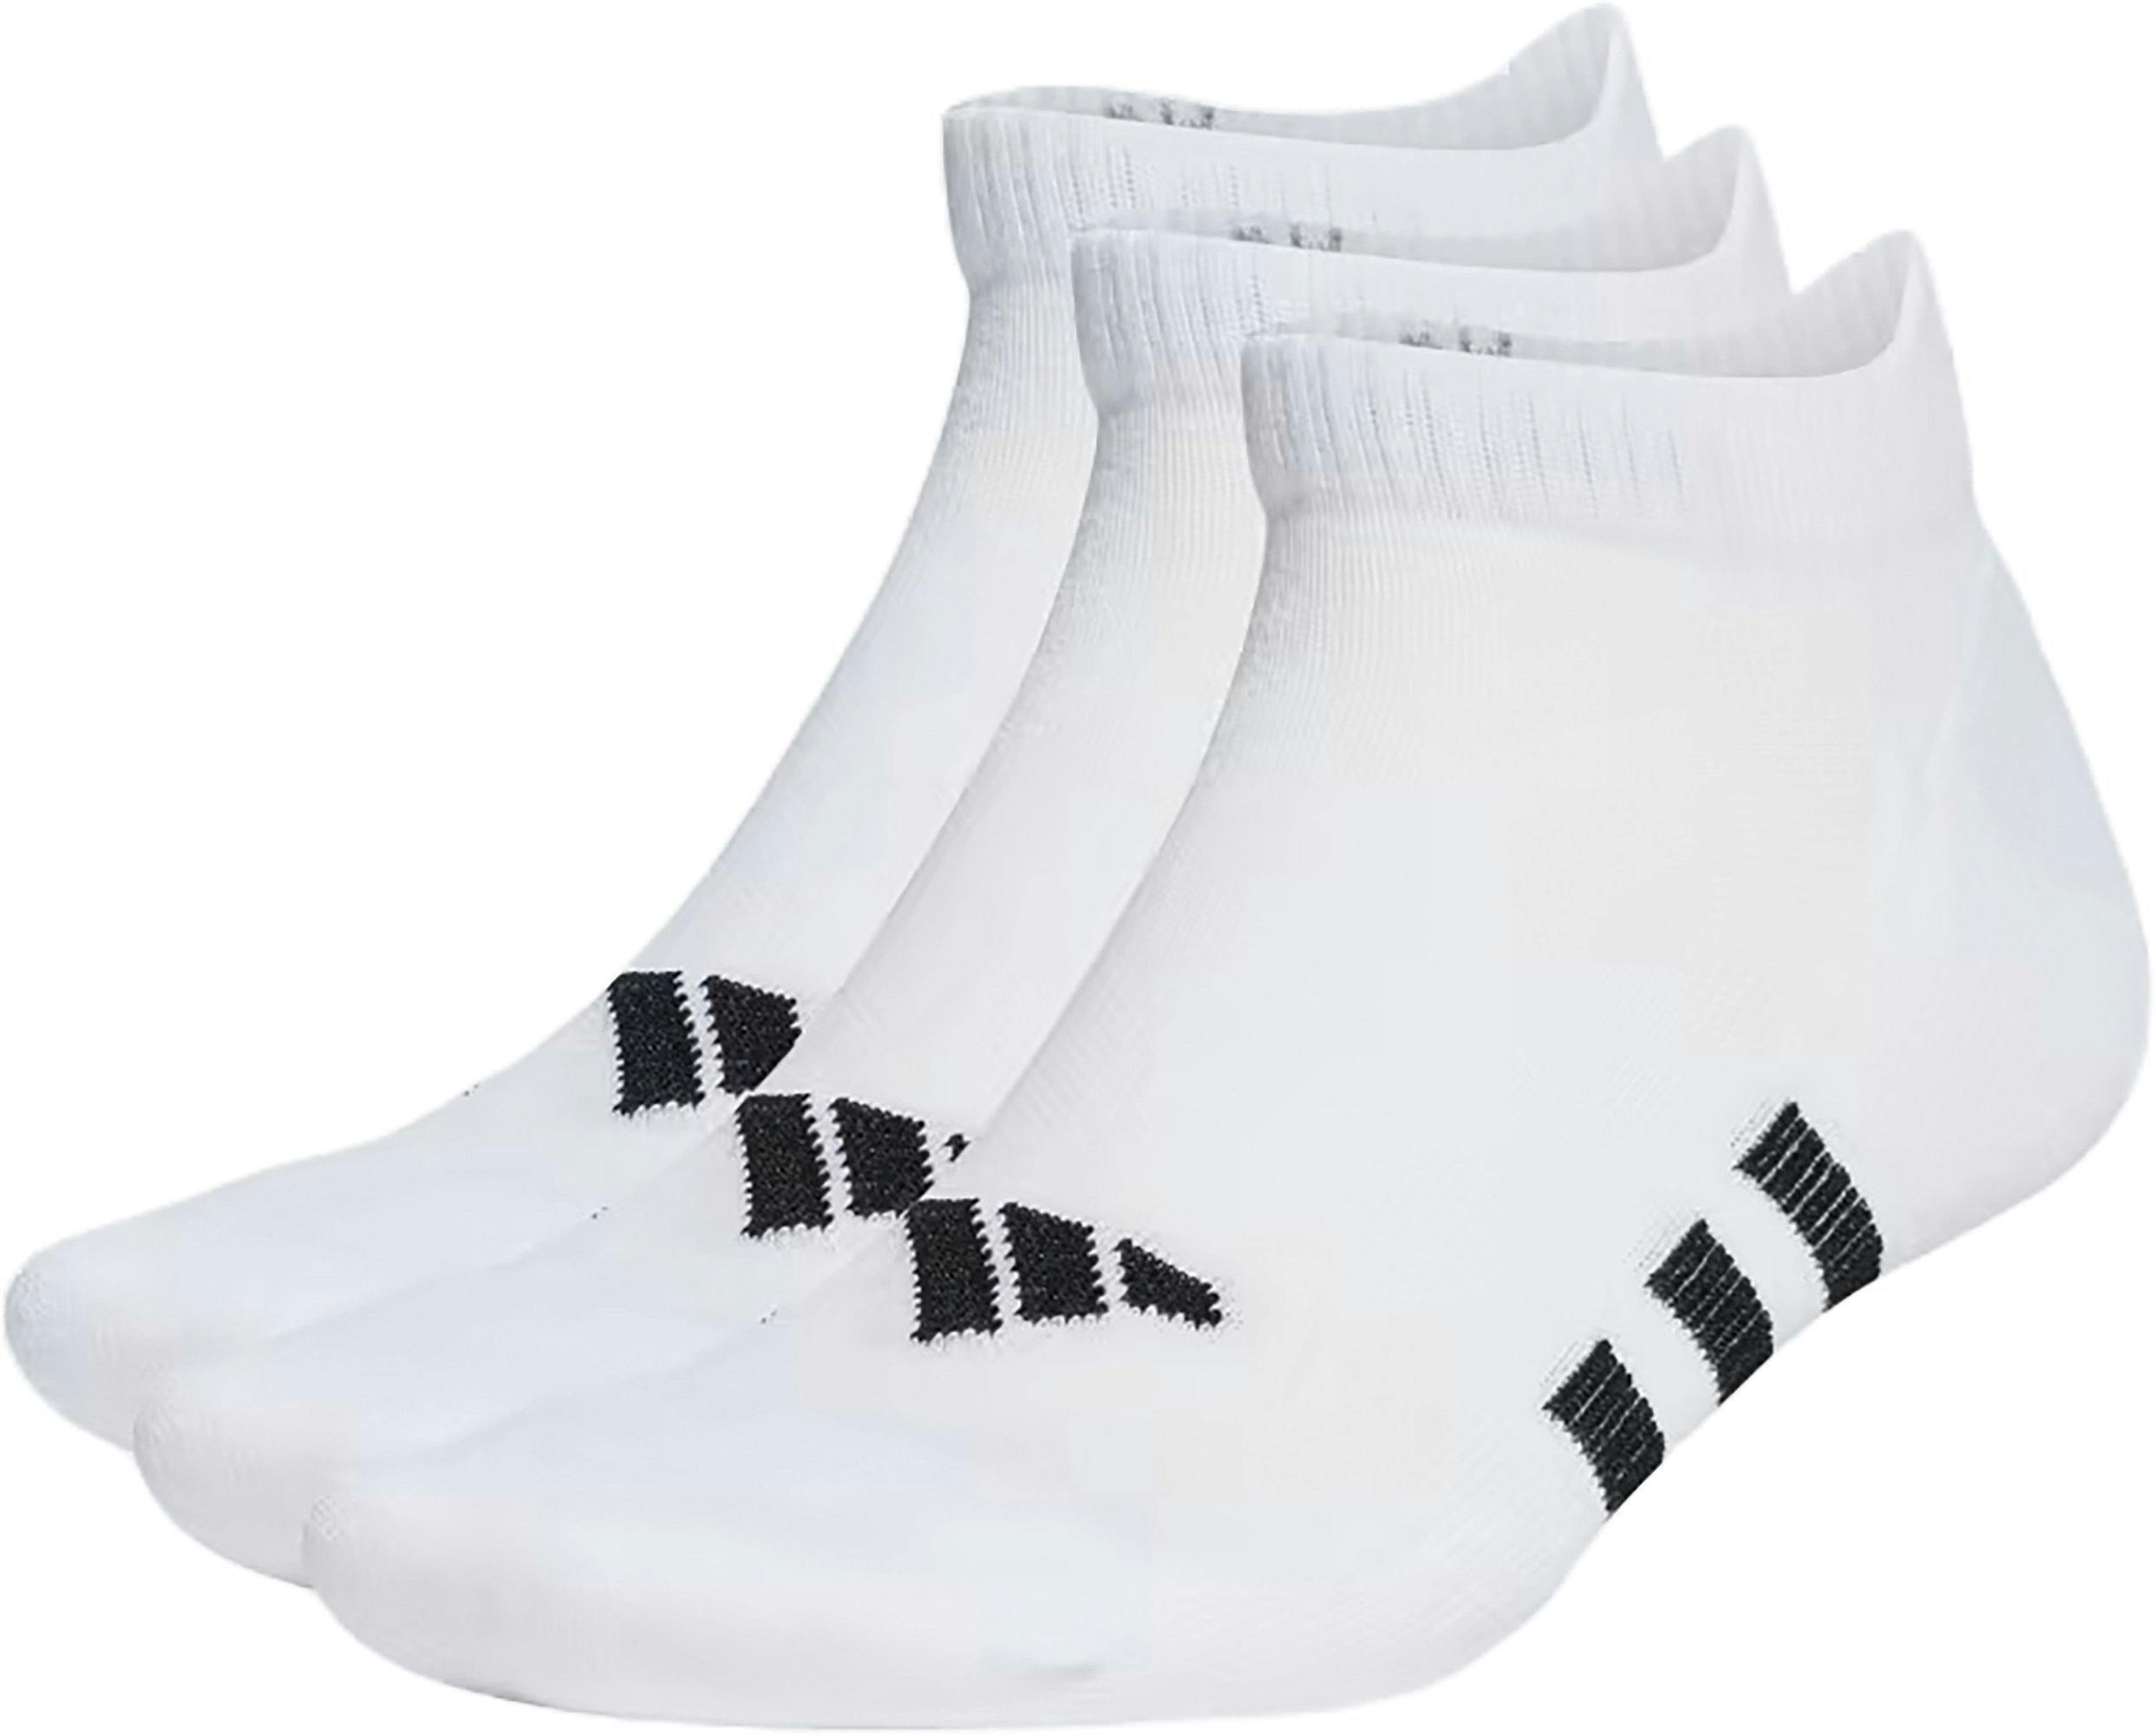 Product image for Performance Cushioned 3 Pairs Low Socks - Unisex